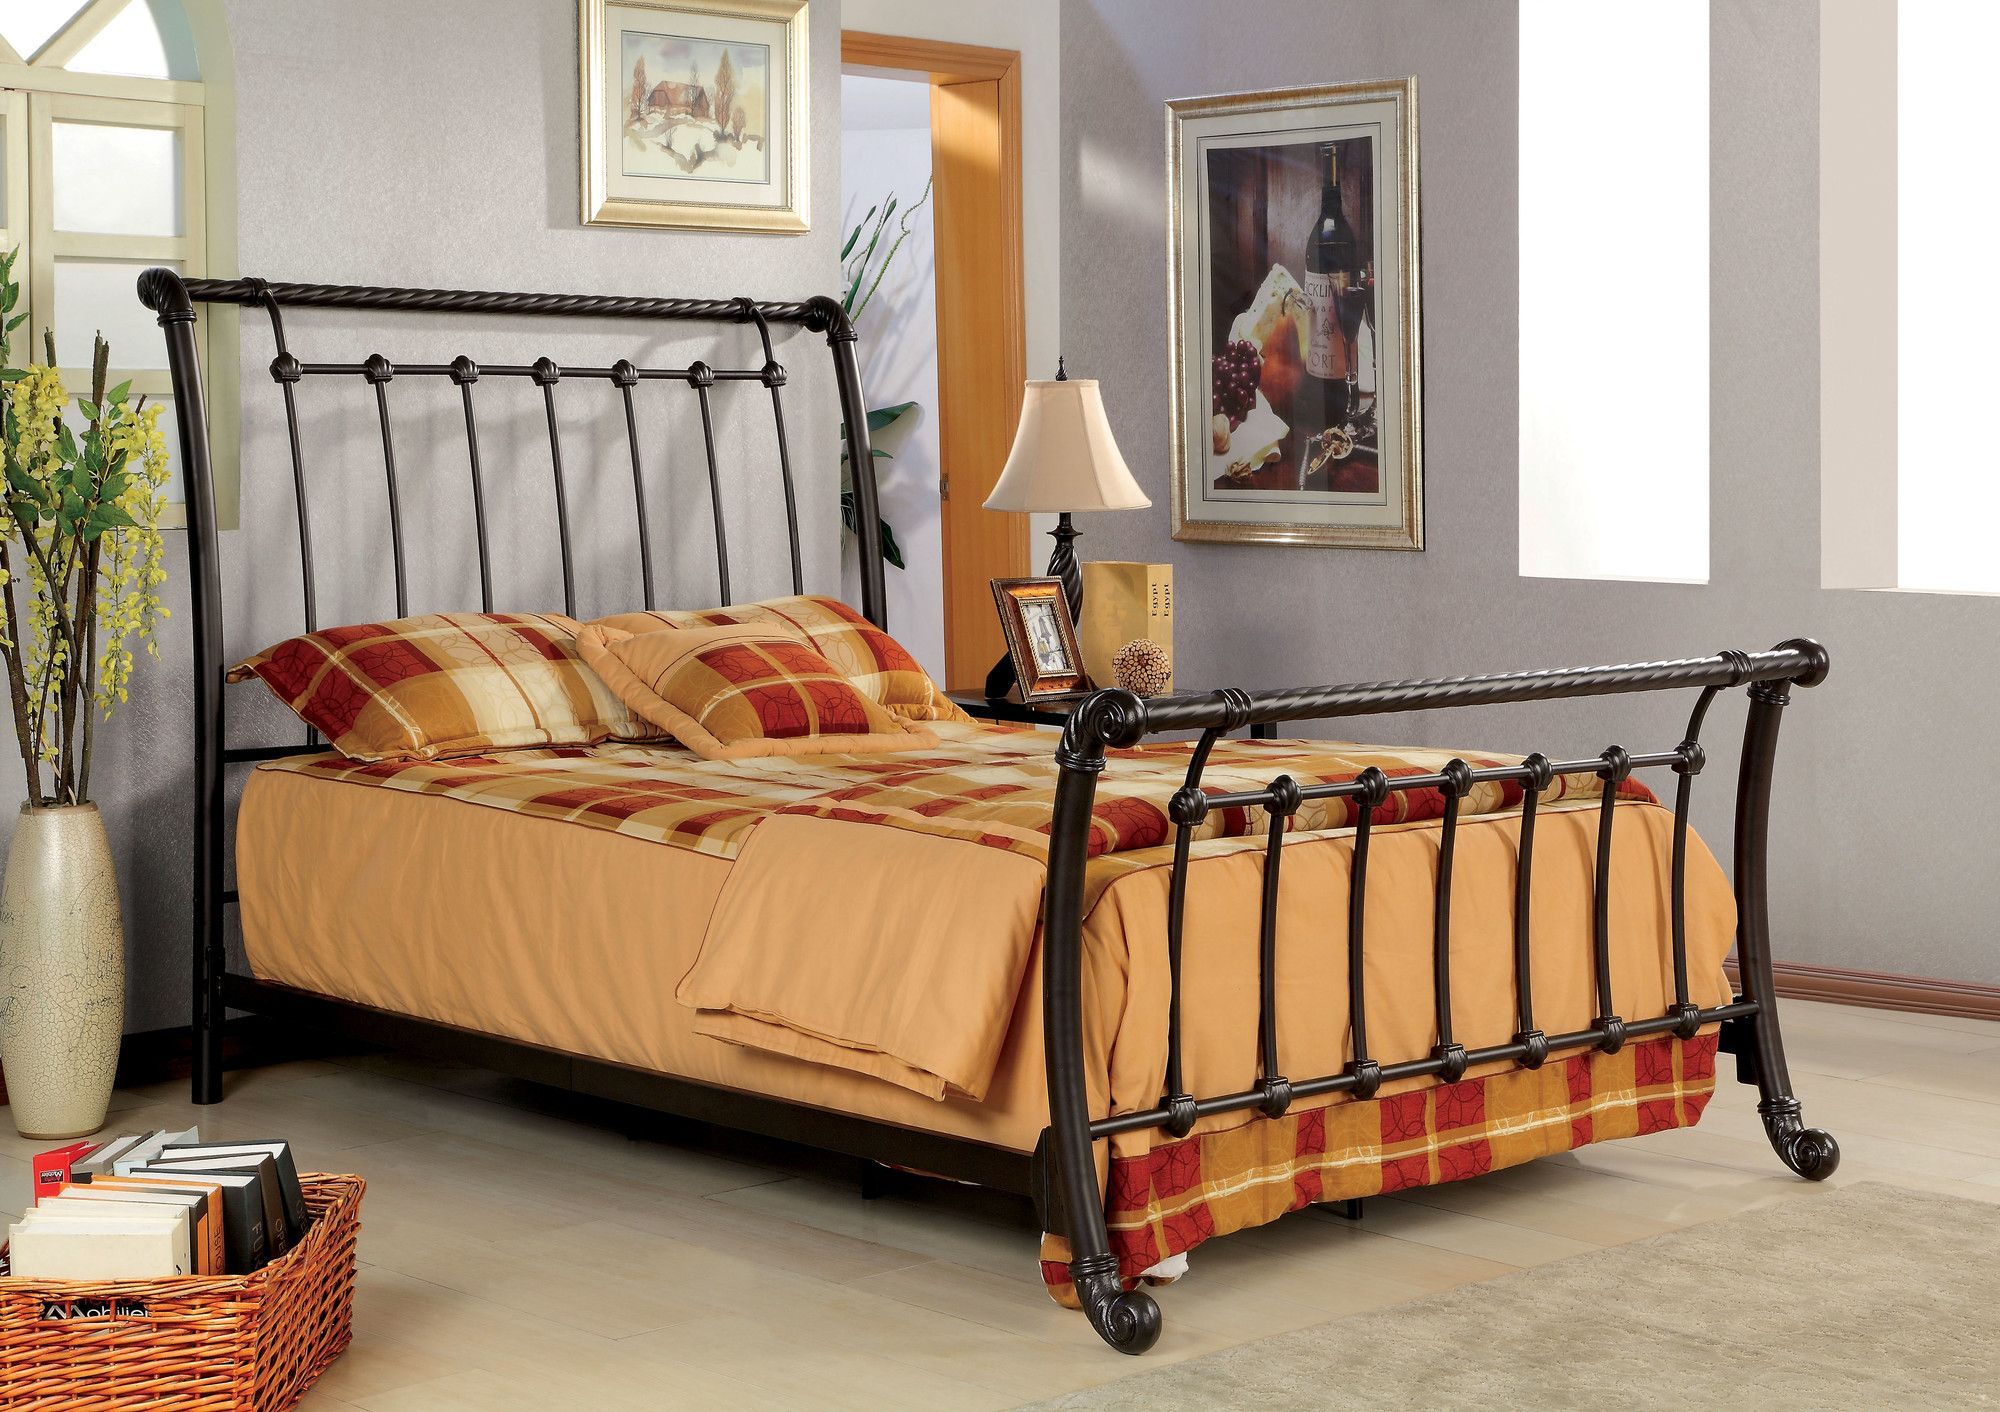 sleigh-bed5